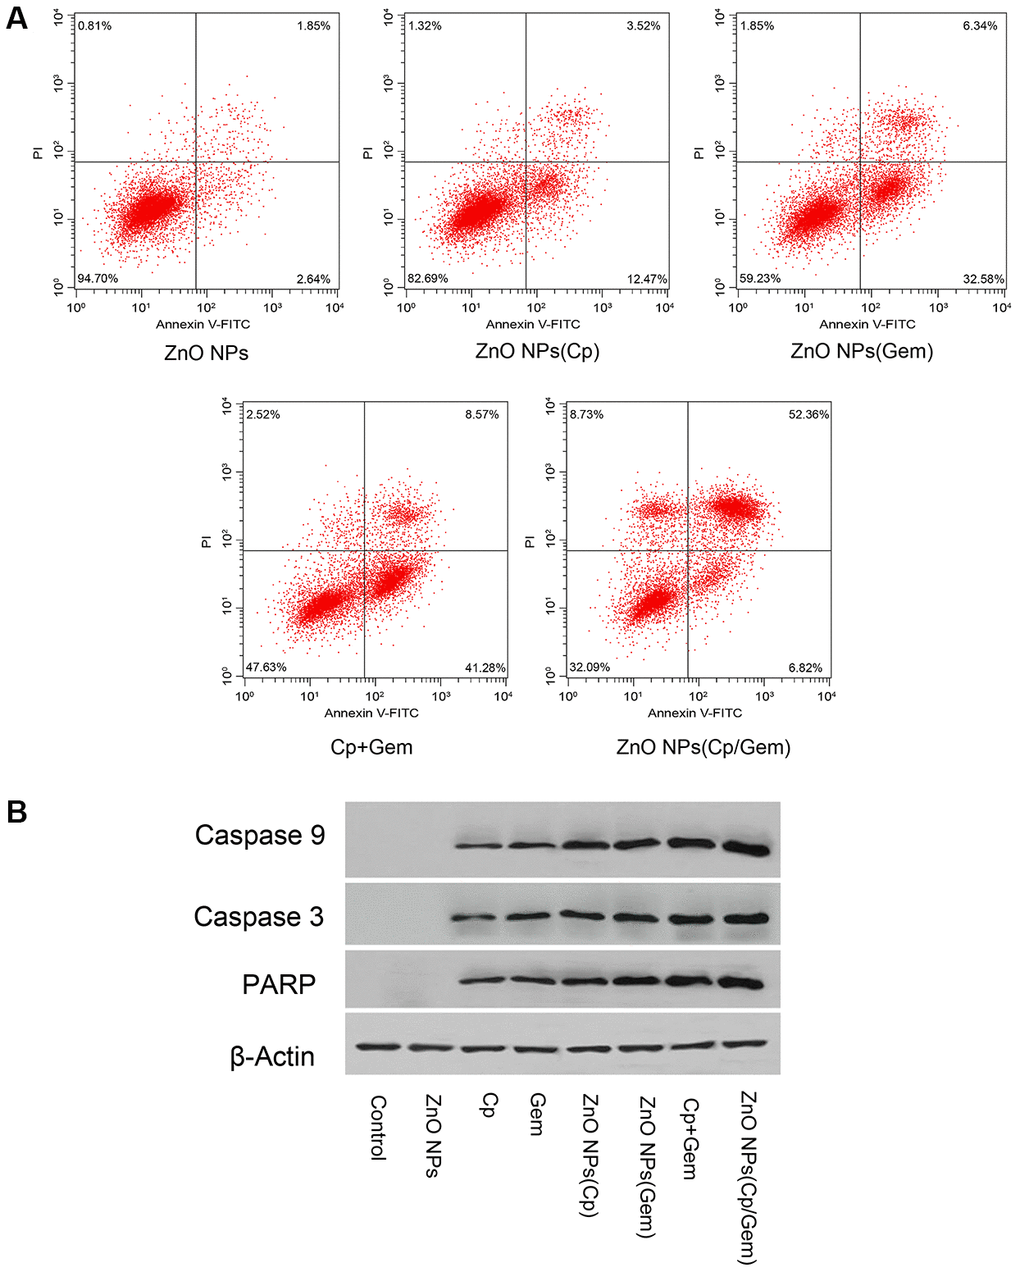 Effect of ZnO NPs(Cp/Gem) on A549 apoptosis. (A) Apoptosis is tested by Annexin V-FITC/PI method. (B) The protein levels of Caspase3, Caspase 9, and RARP is measured by Western blot.